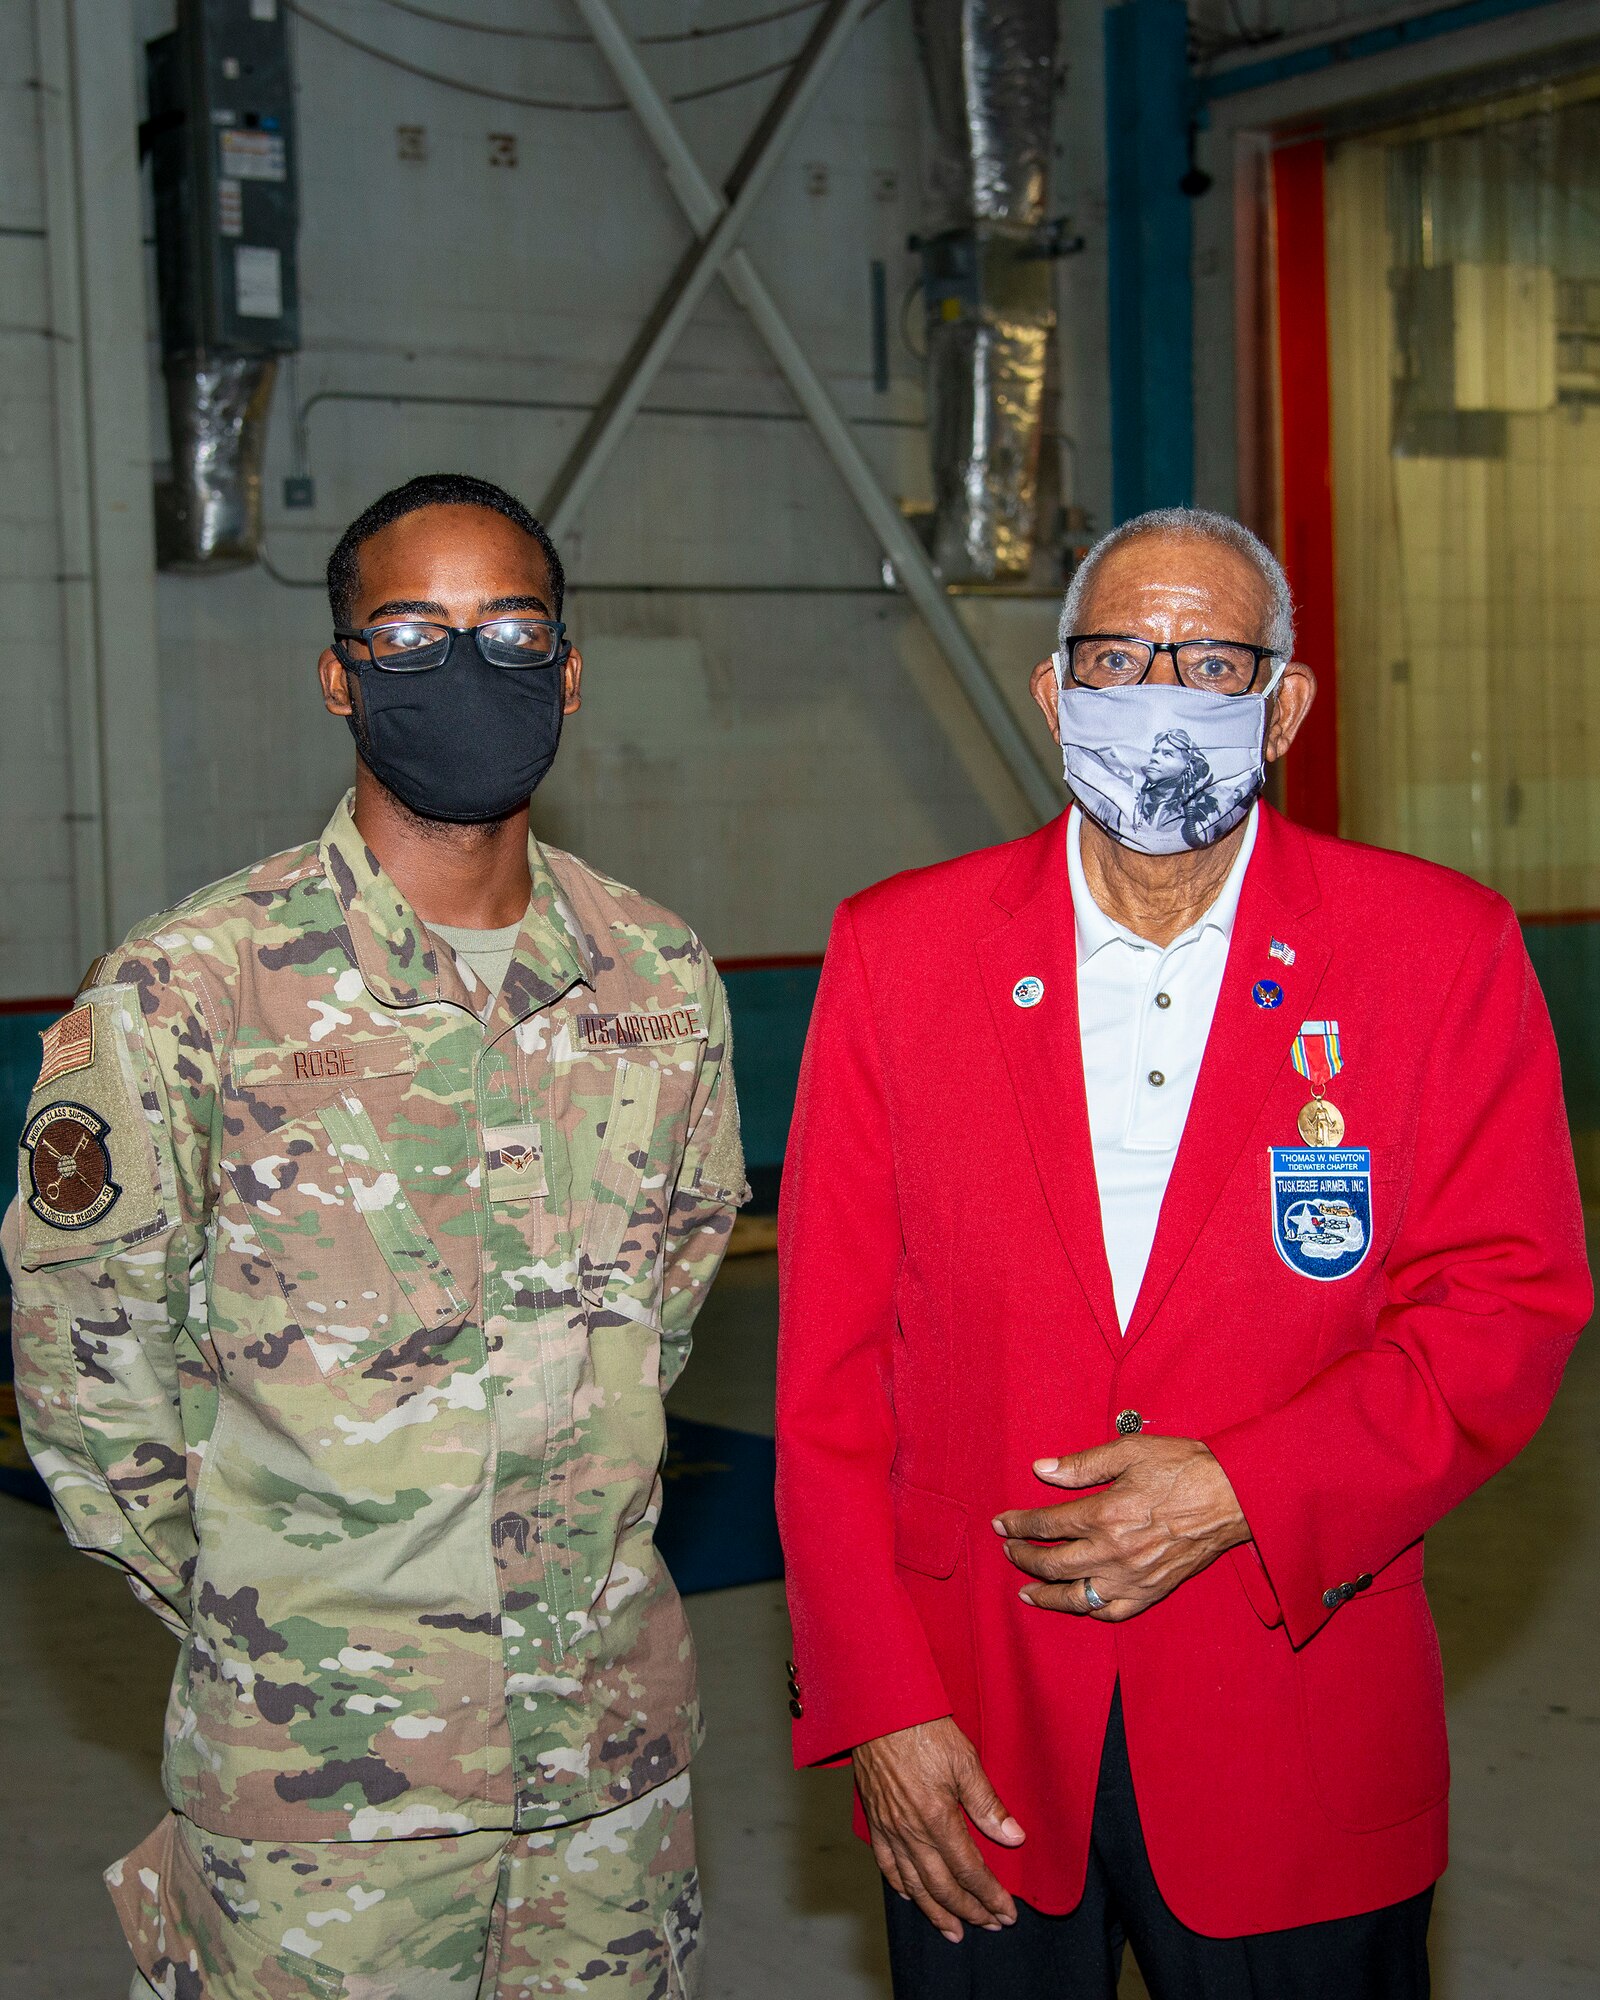 U.S. Air Force Airman 1st Class Duron Rose, a 6th Logistics Readiness Squadron fuels distribution apprentice, pauses for a photo with U.S. Army Air Forces Sgt. Thomas Newton, a Documented Original Tuskegee Airman, at MacDill Air Force Base, Fla., Nov. 10, 2020.